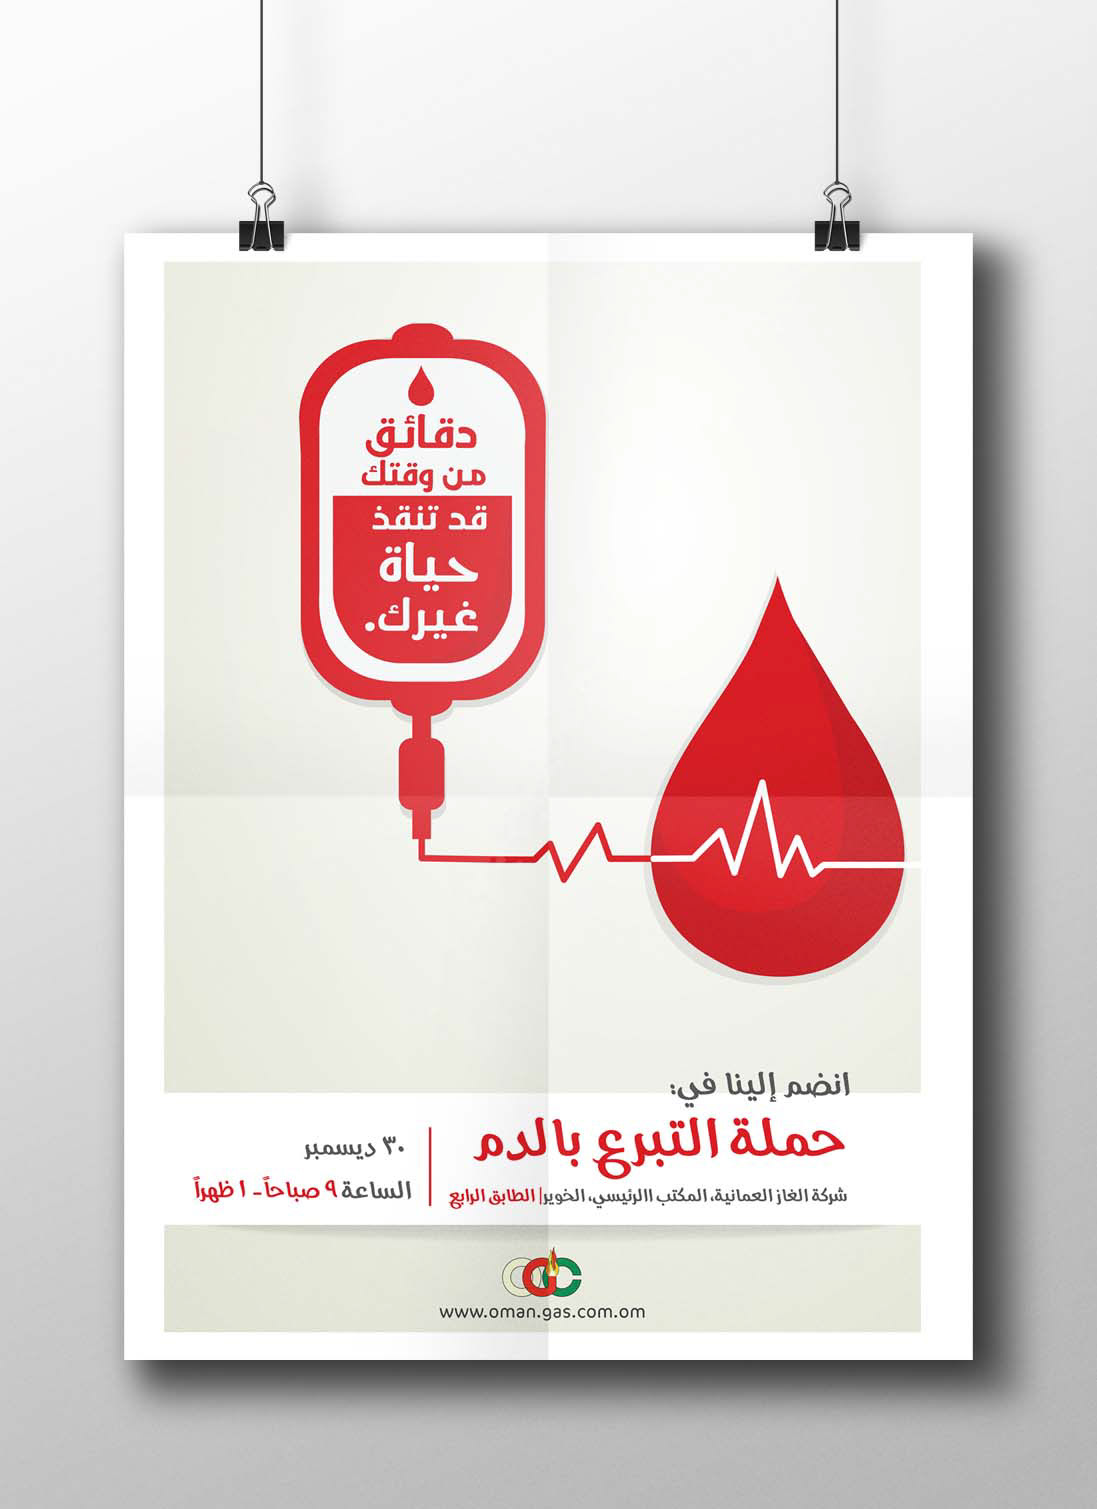 BLOOD DONATION DAY